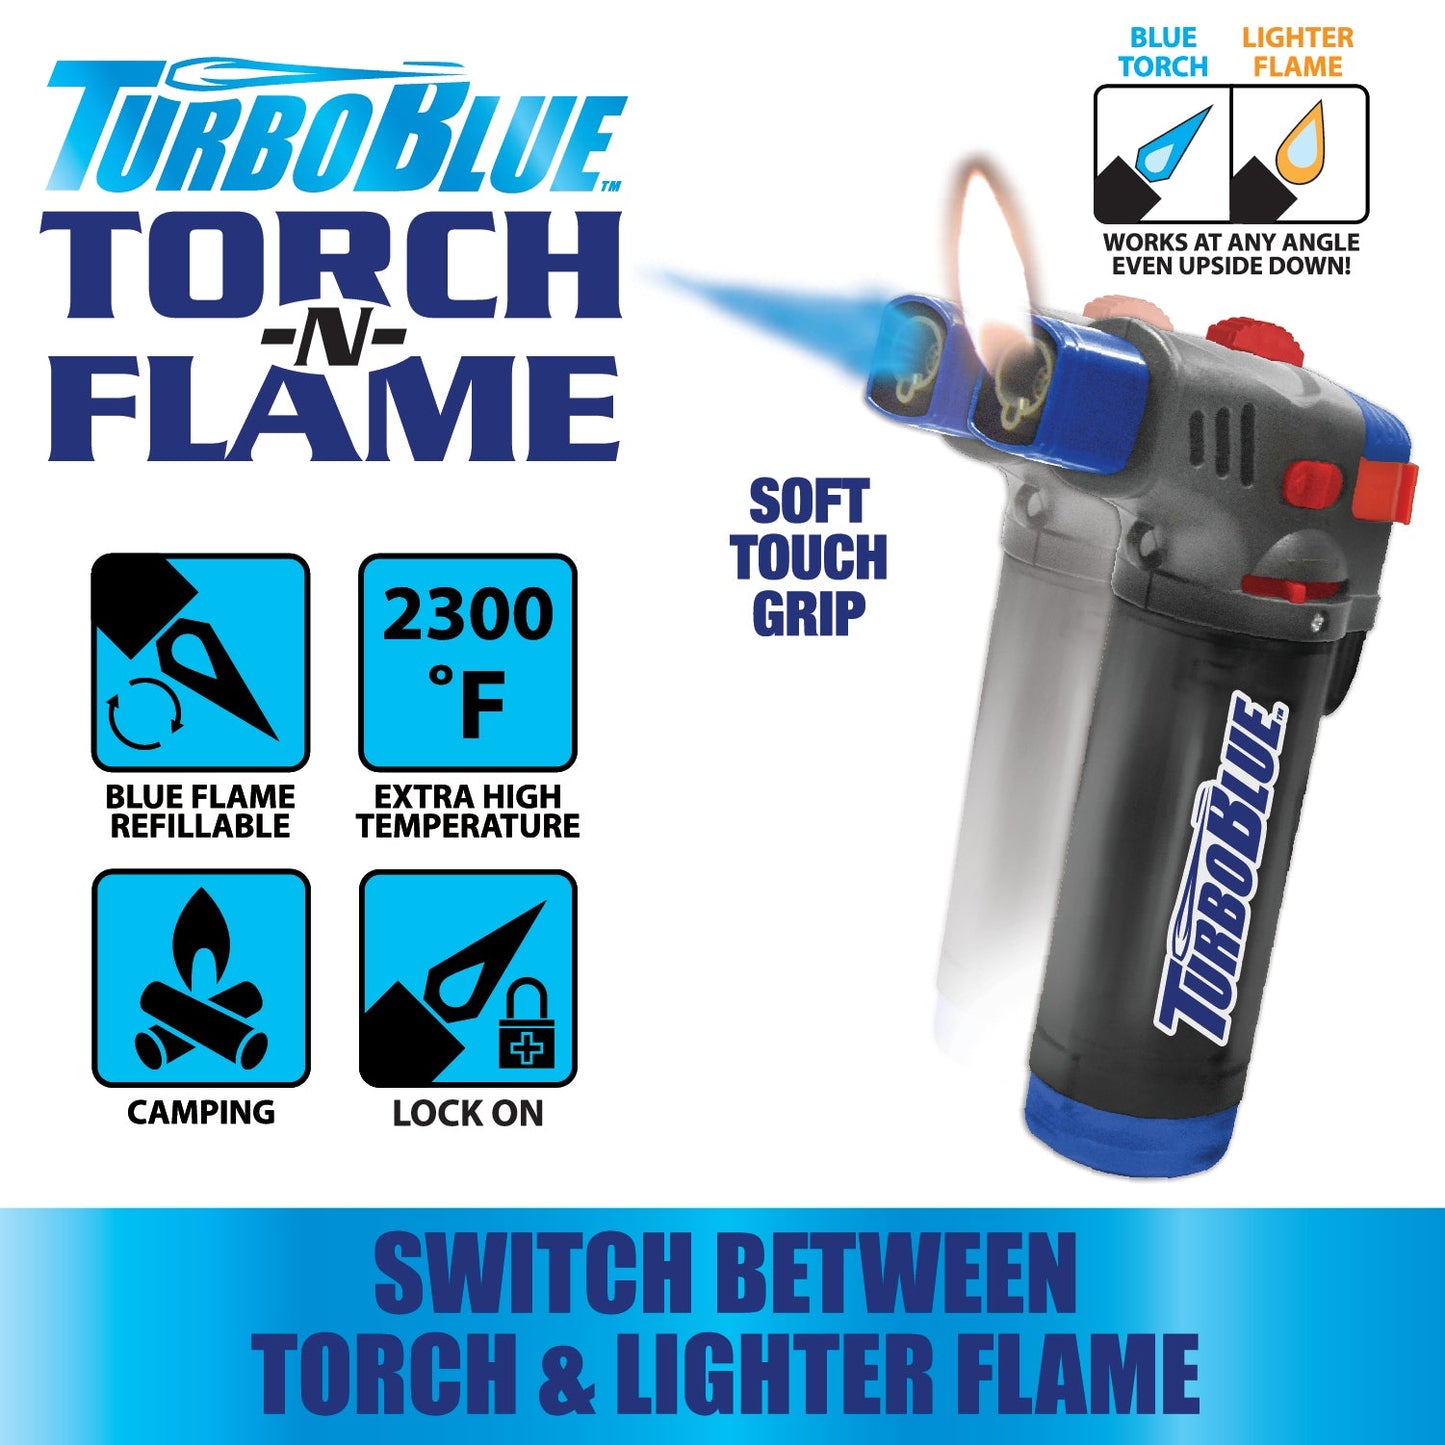 ITEM NUMBER 025557 TWO FLAME TB XXL LIGHTER 12 PIECES PER DISPLAY